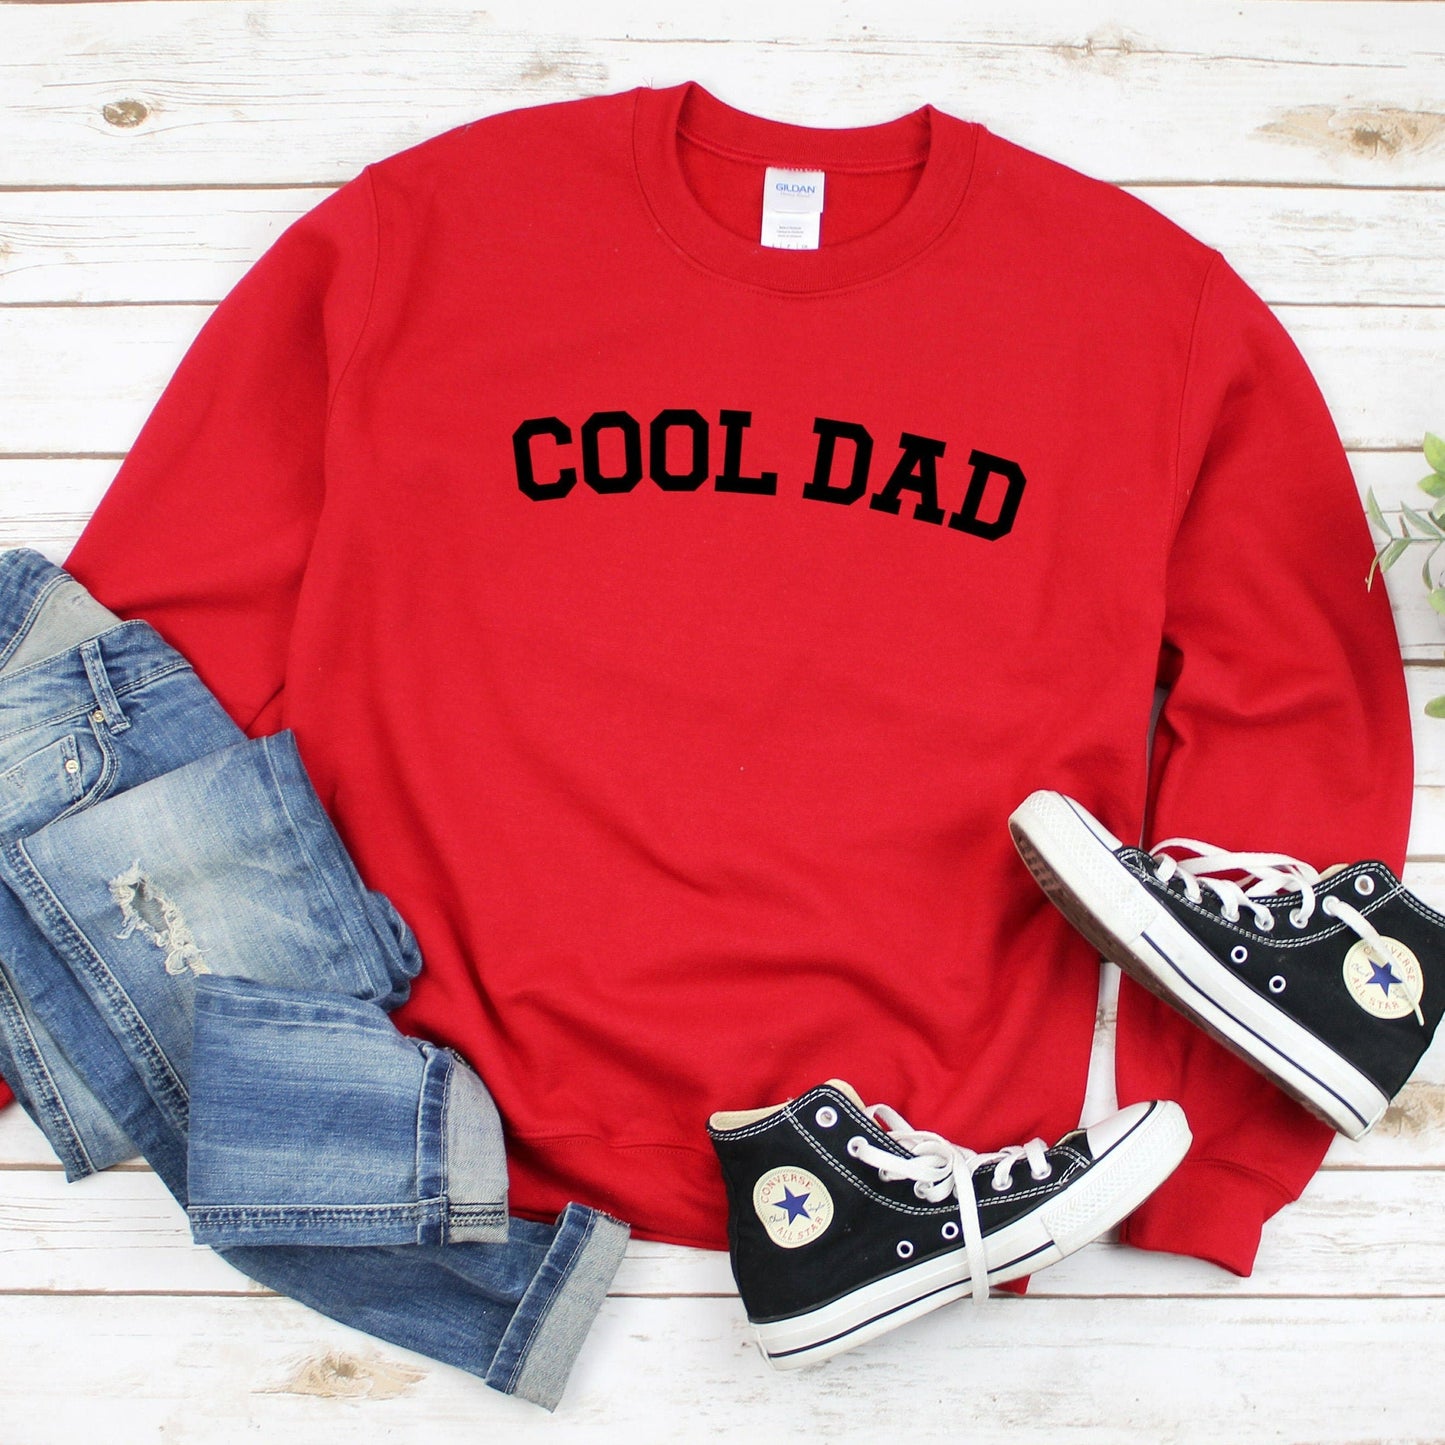 Cool Dad Crewneck Sweatshirt, Dad Shirt, Fathers Day Gift from Wife and Kids, Best Dad TShirt, New Dad Shirt